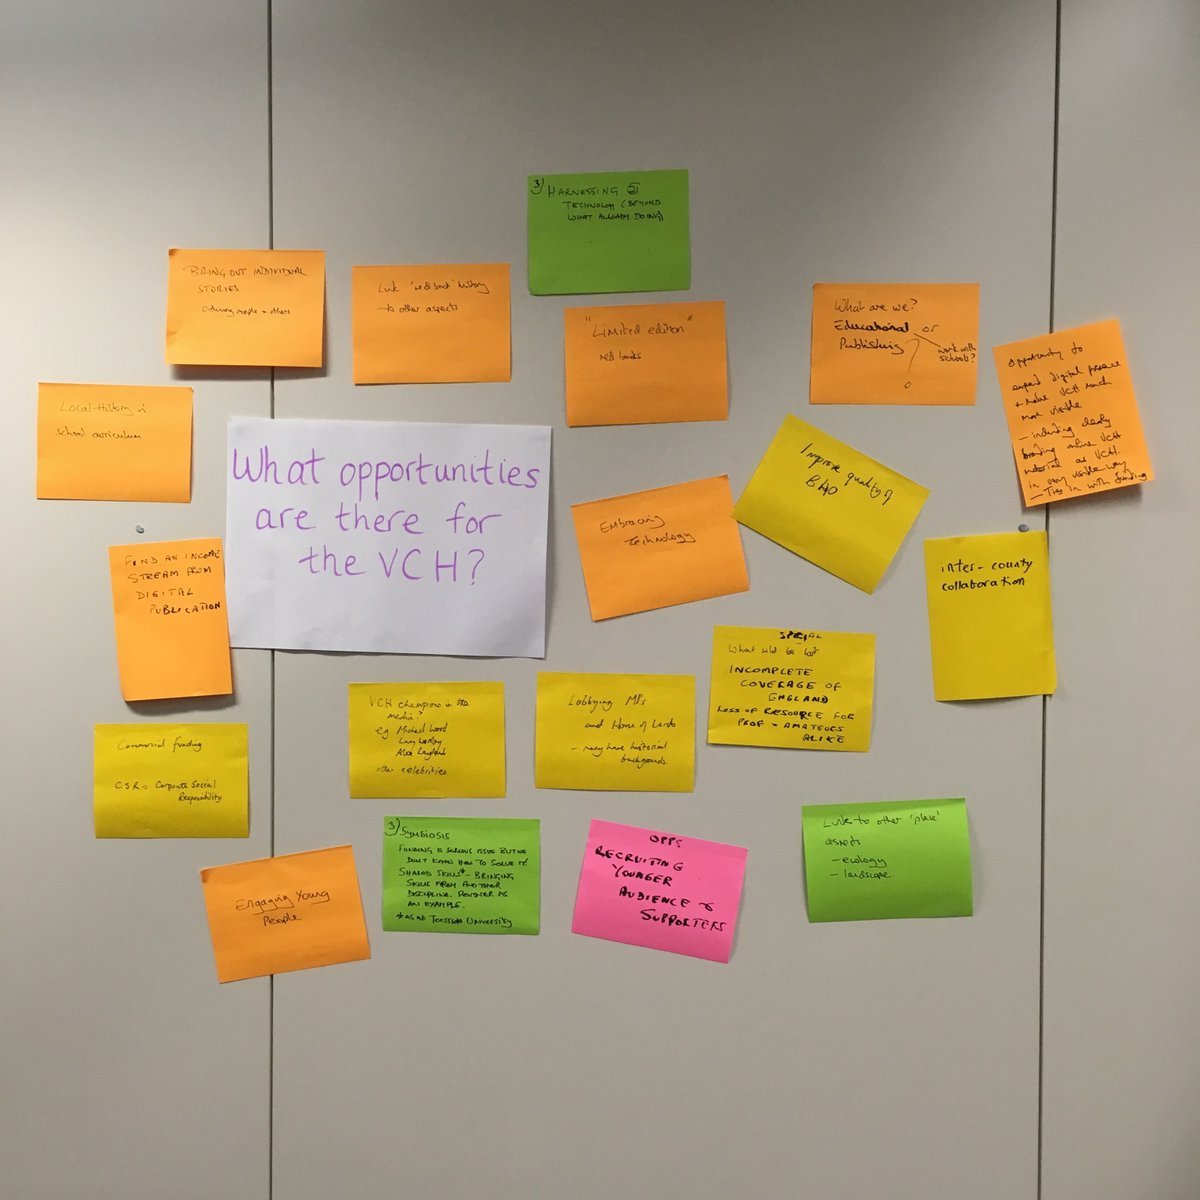 Thanks to all the VCH contributors, colleagues & friends who joined us for our #VCHDay @ihr_history last week. Here are some of the thoughts we shared on:
What is the VCH?
What's special about the VCH?
What opportunities are there for the VCH?
Thanks for all your ideas and input!